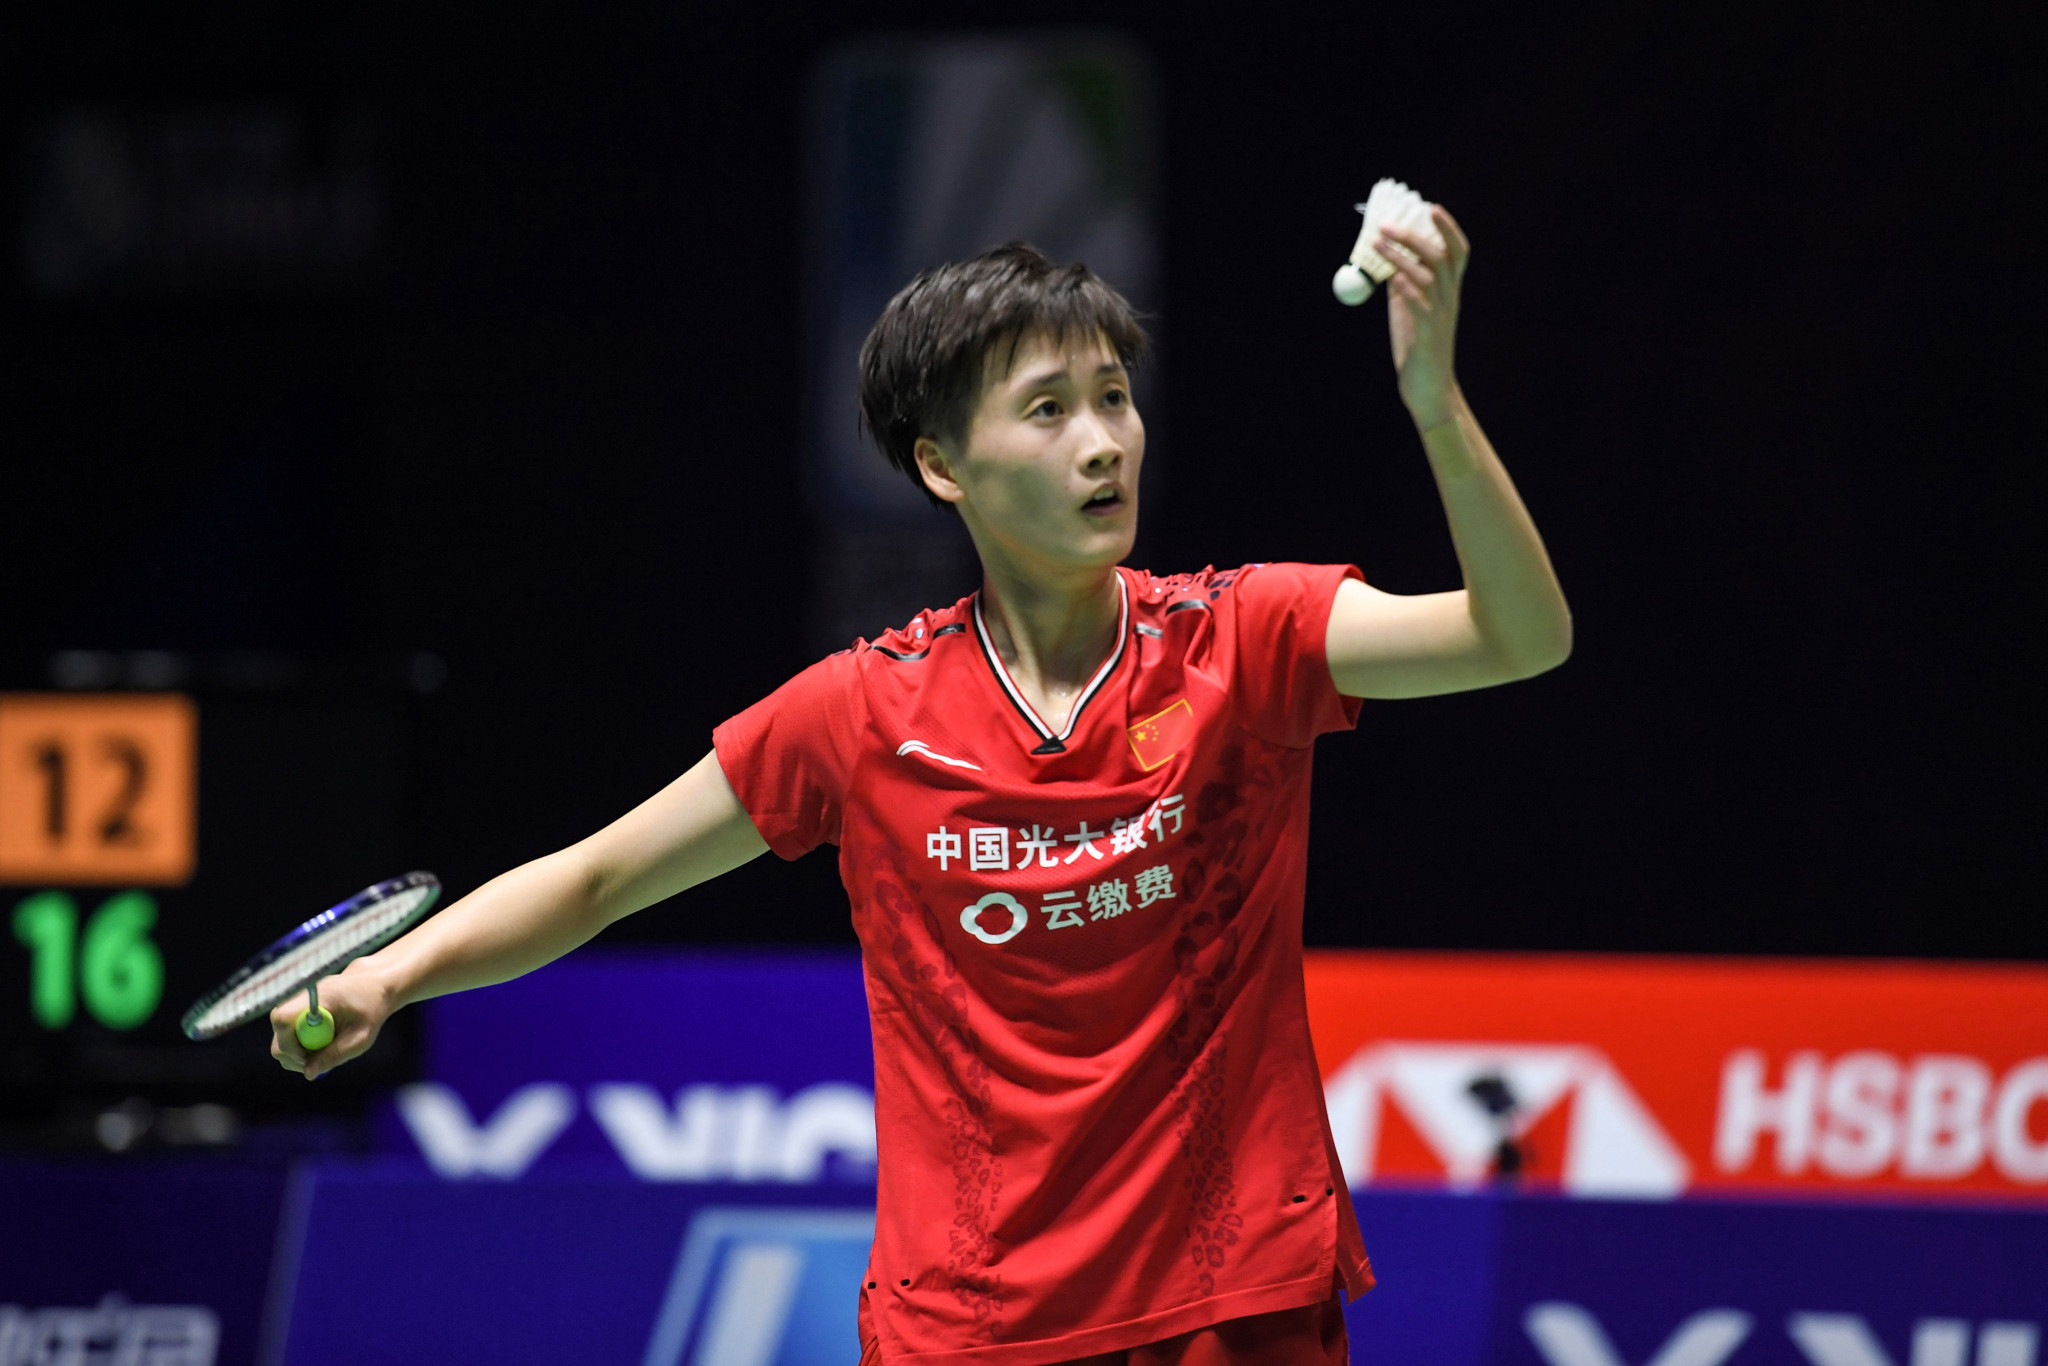 Chen Yufei continued her march in the women's tournament ©Getty Images